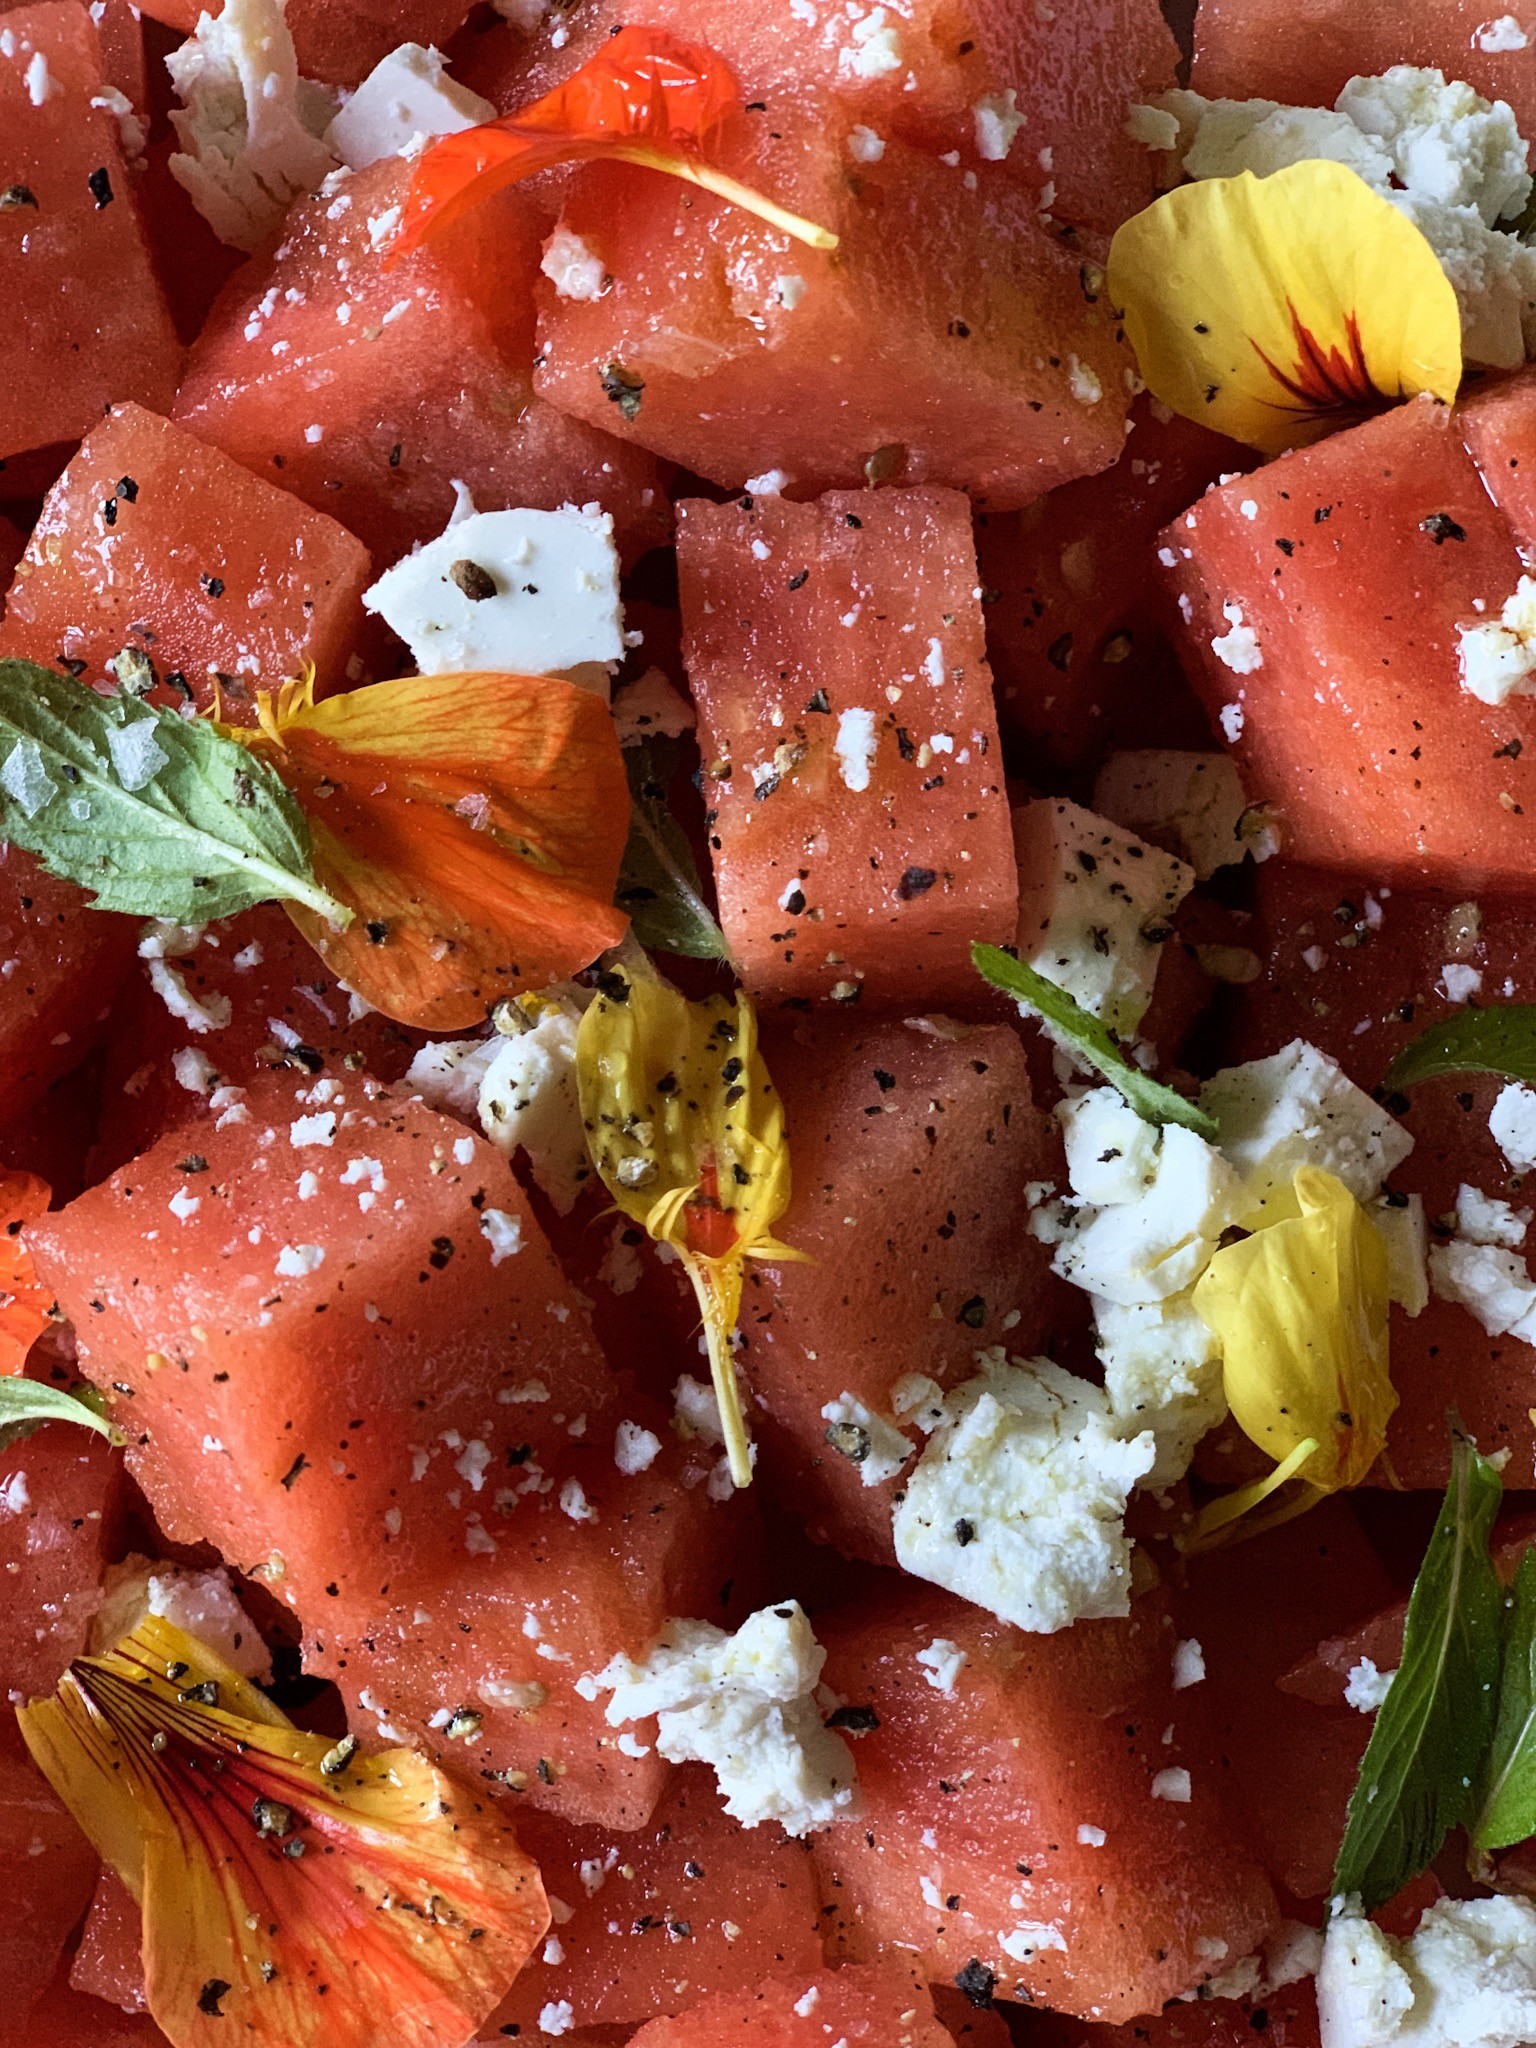 Watermelon Salad with Ricotta Salt, Mint, and Edible Flowers